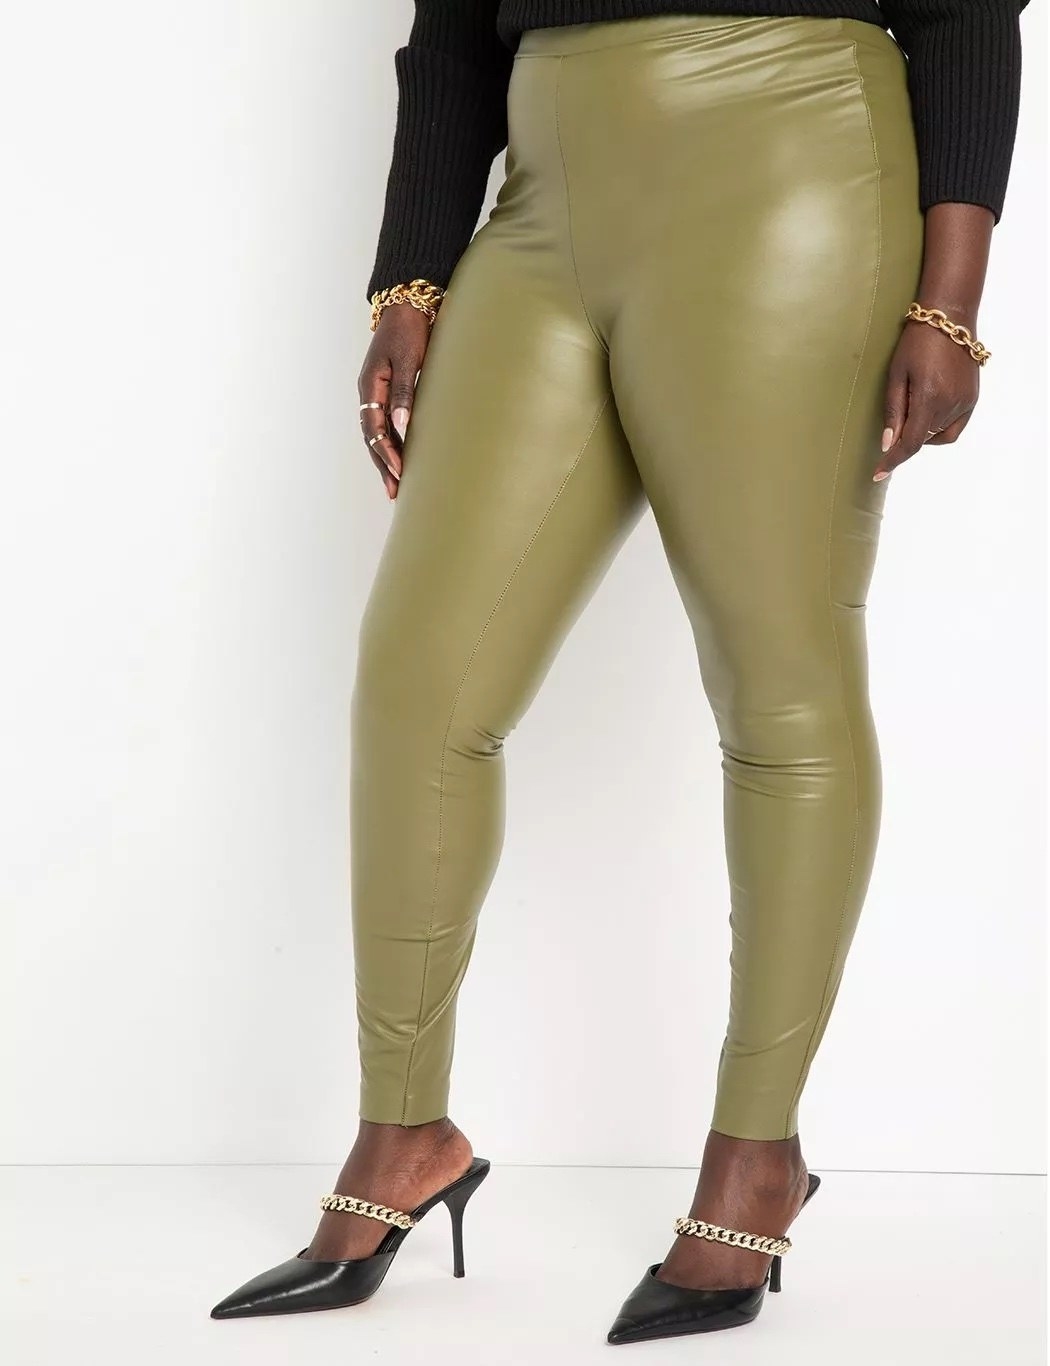 A model wearing green leggings with black shoes and a black top